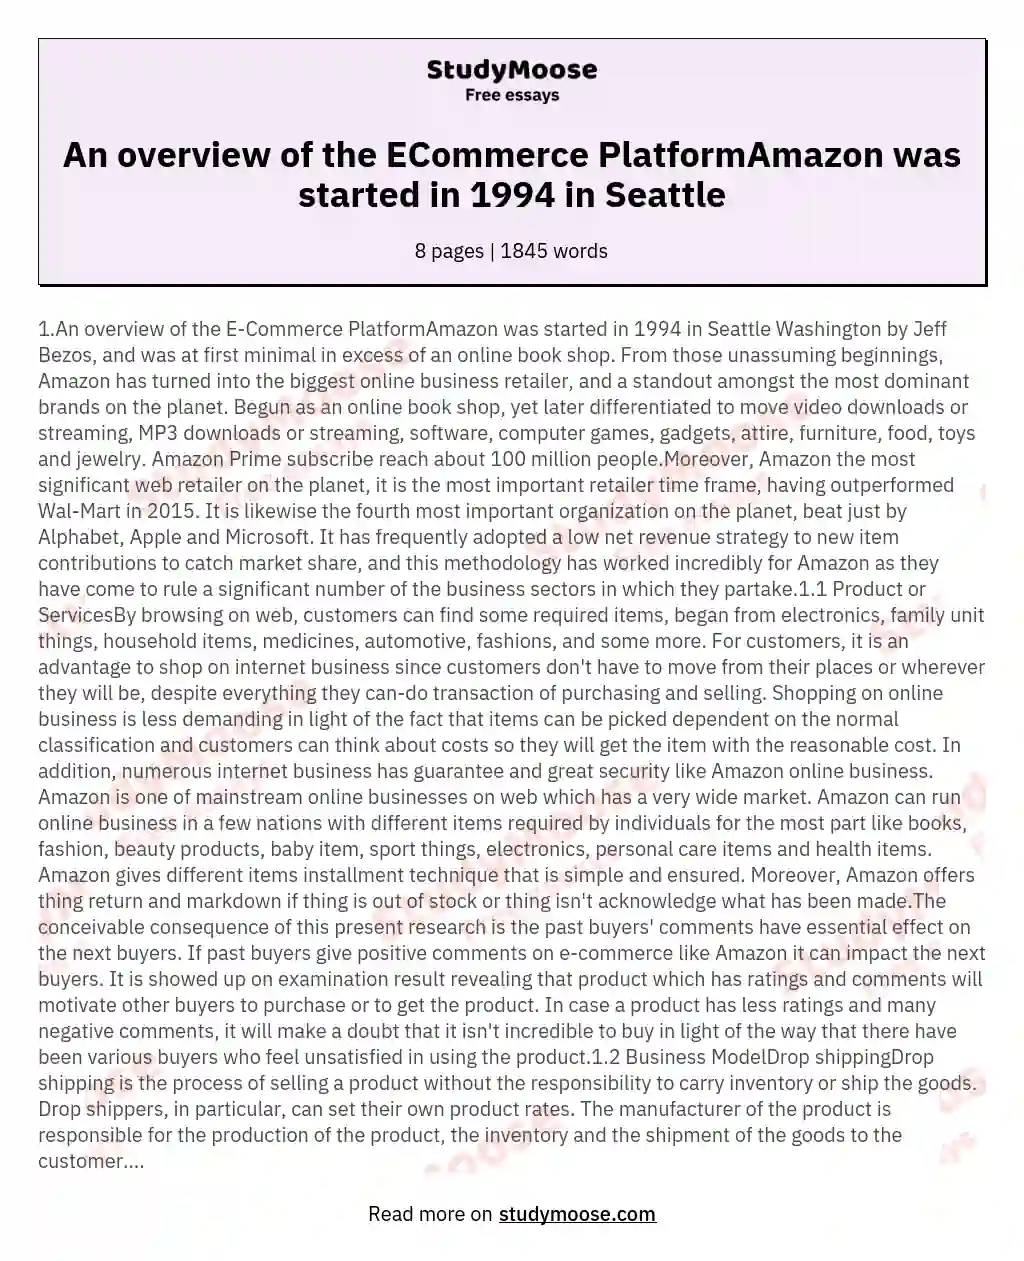 An overview of the ECommerce PlatformAmazon was started in 1994 in Seattle